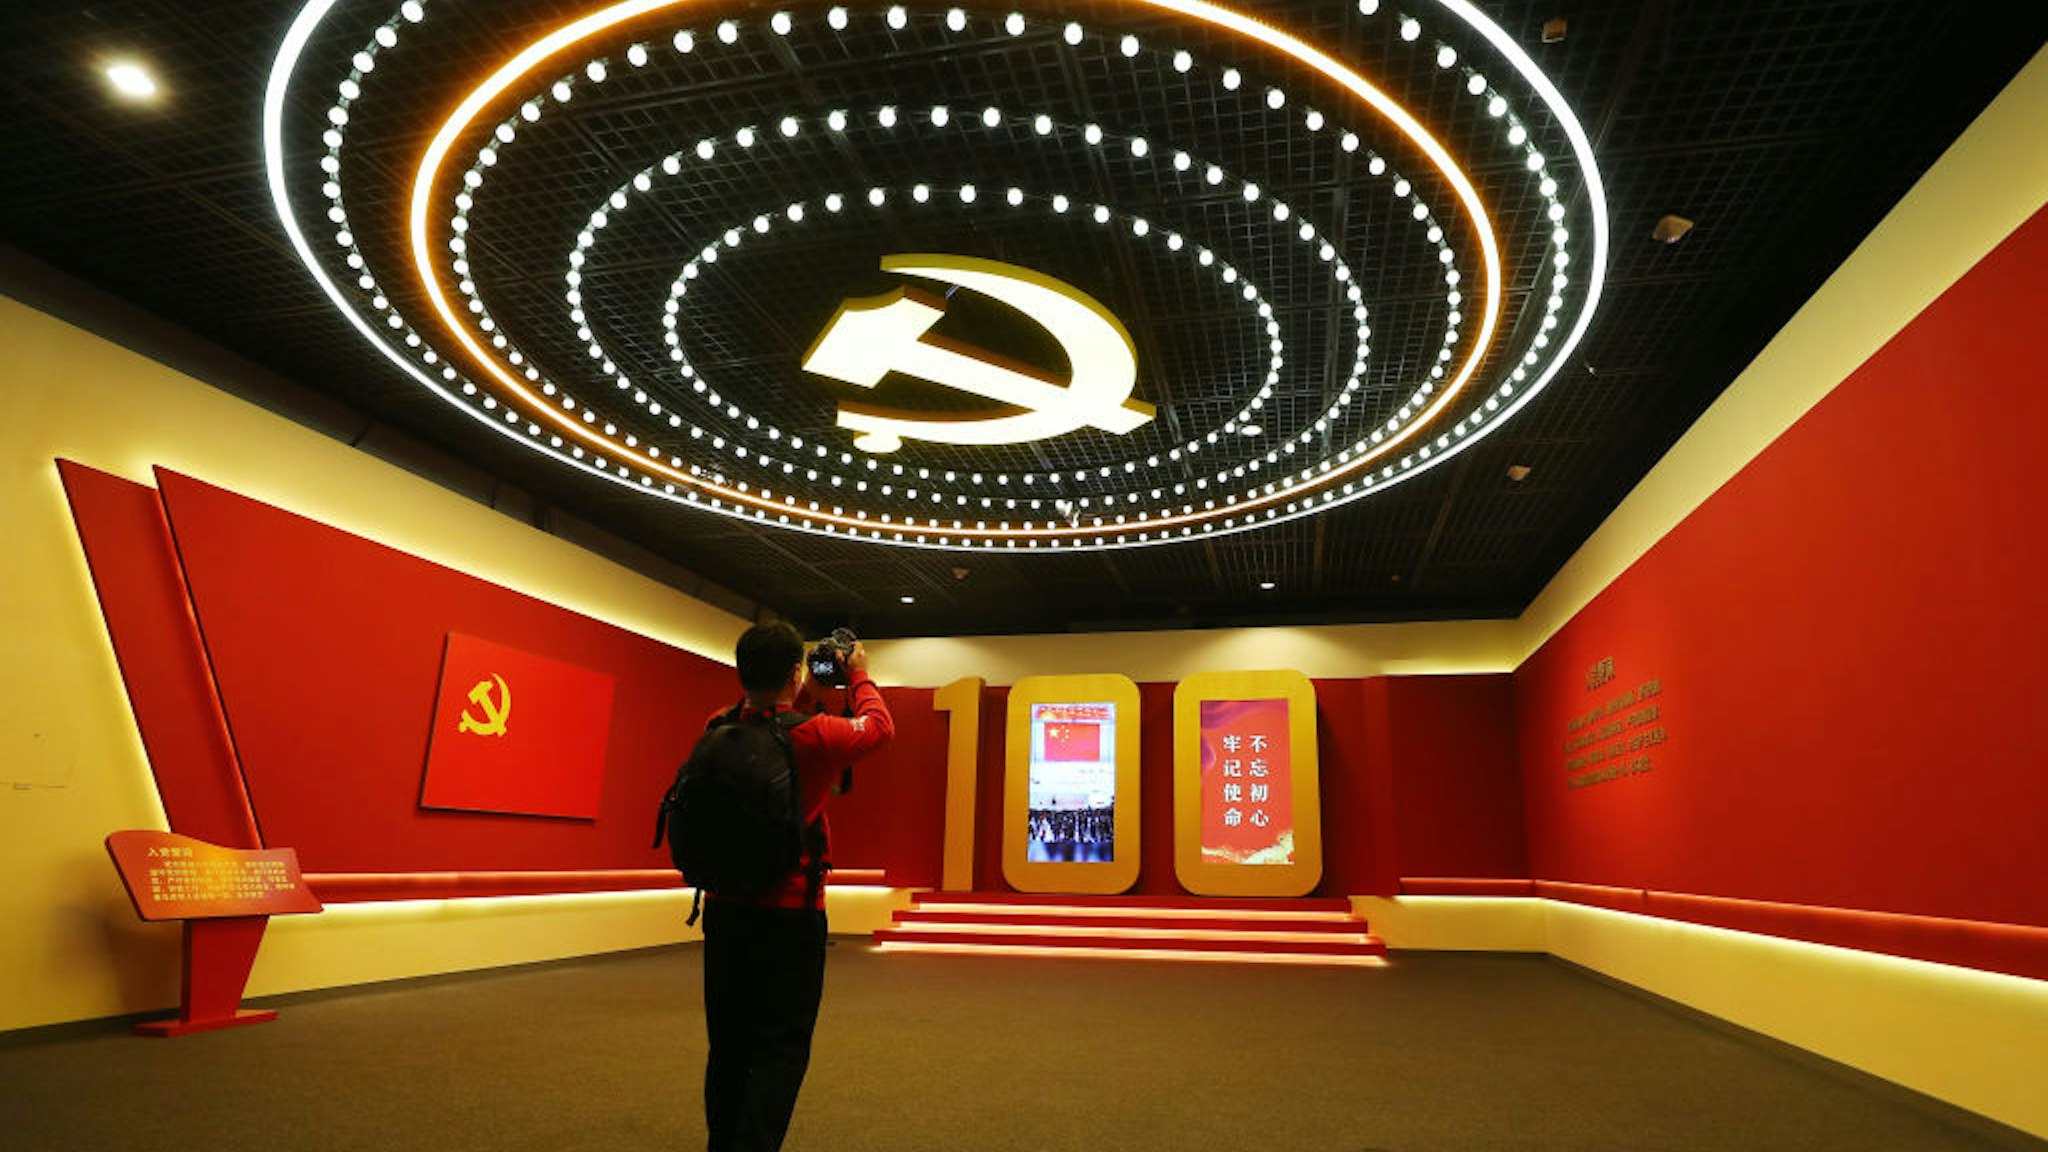 A visitor watches an exhibition commemorating the 100th anniversary of the founding of the Communist Party of China (CPC) at the Beijing Capital Museum on March 9, 2021 in Beijing, China.